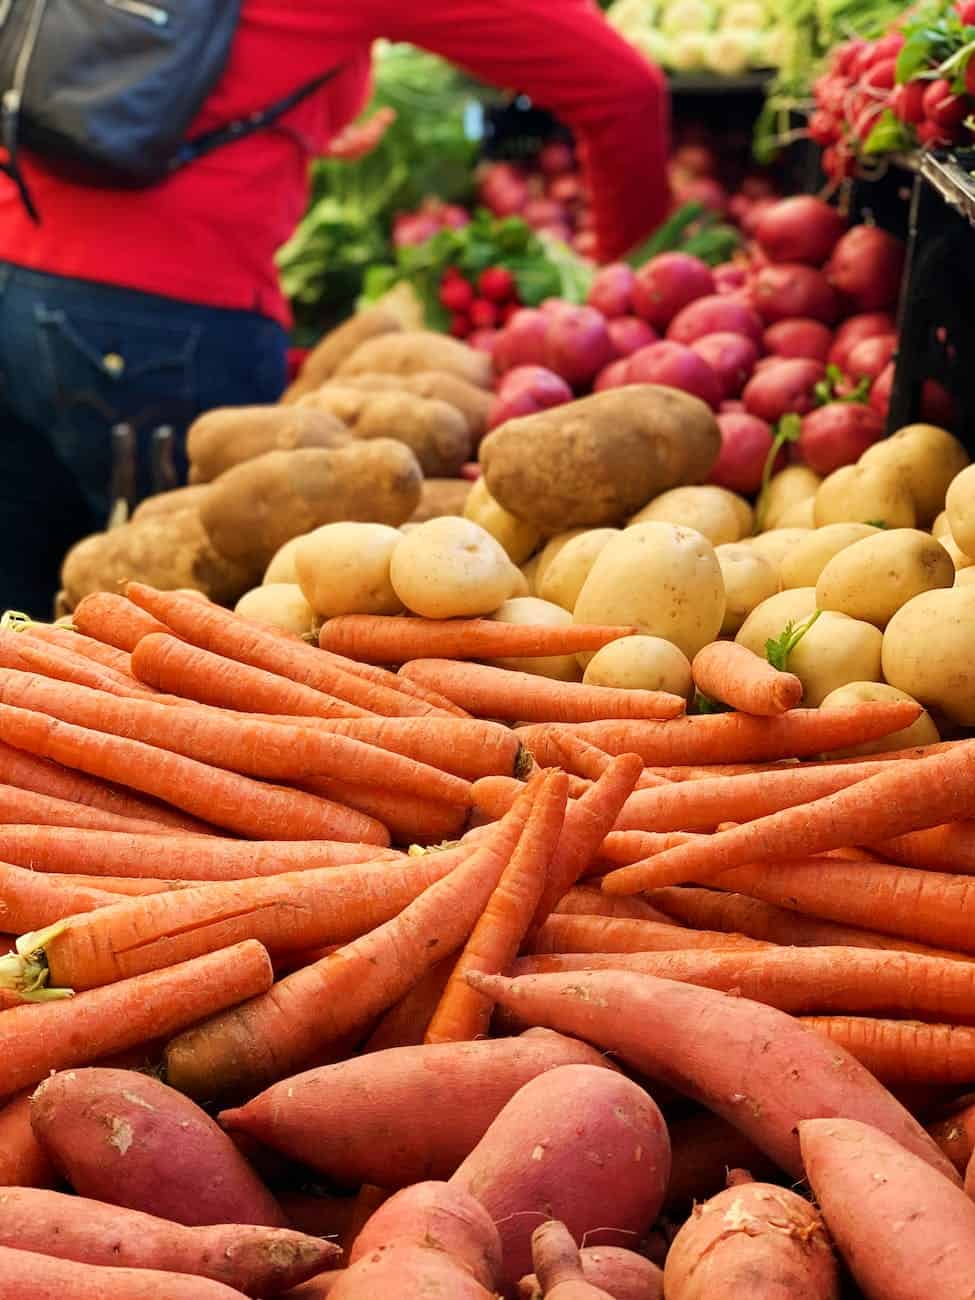 best foods for camping bring root crops vegetables